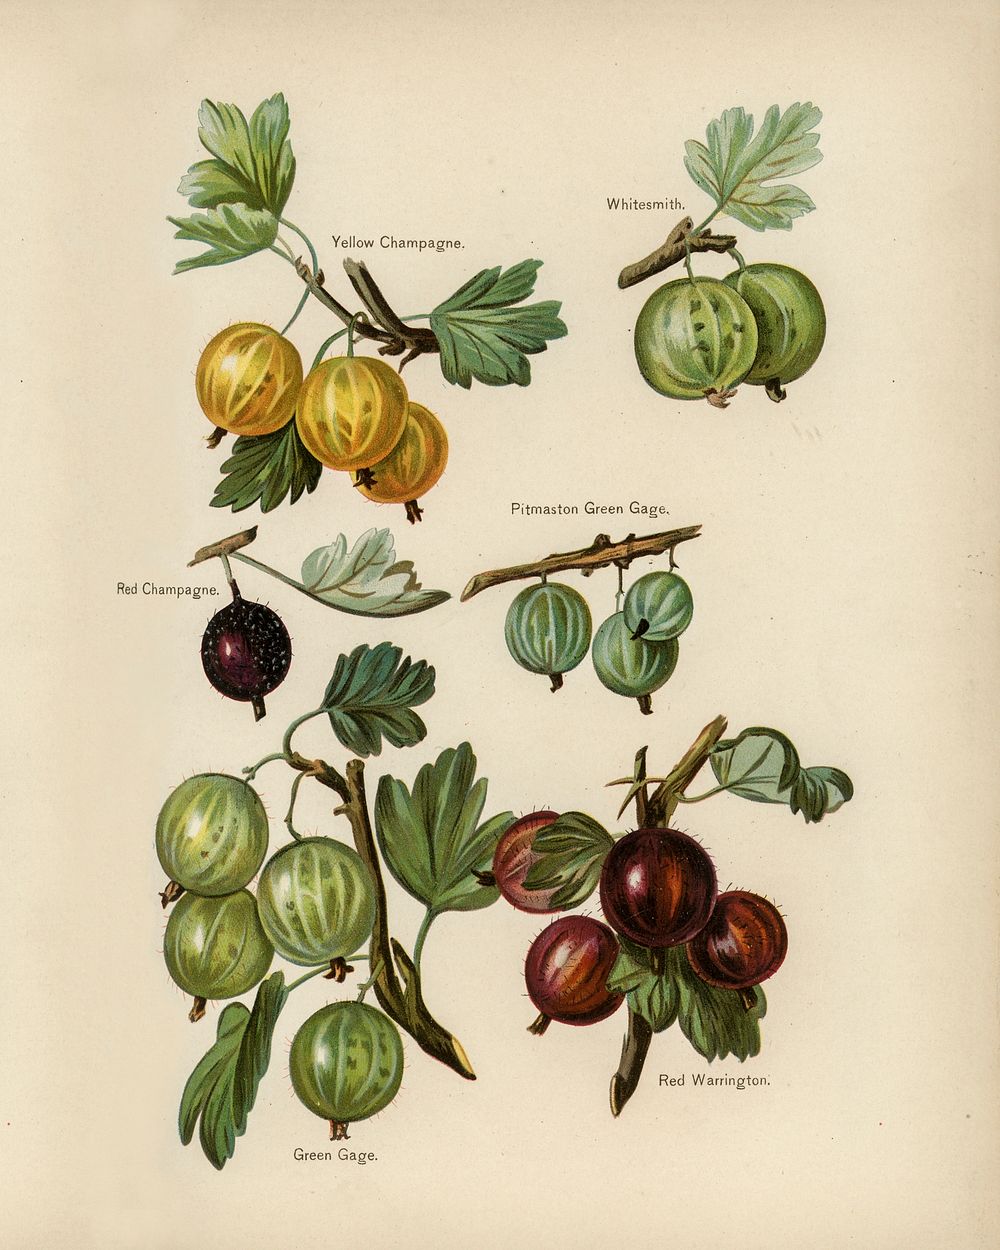 Vintage illustration of gooseberry digitally enhanced from our own vintage edition of The Fruit Grower's Guide (1891) by…